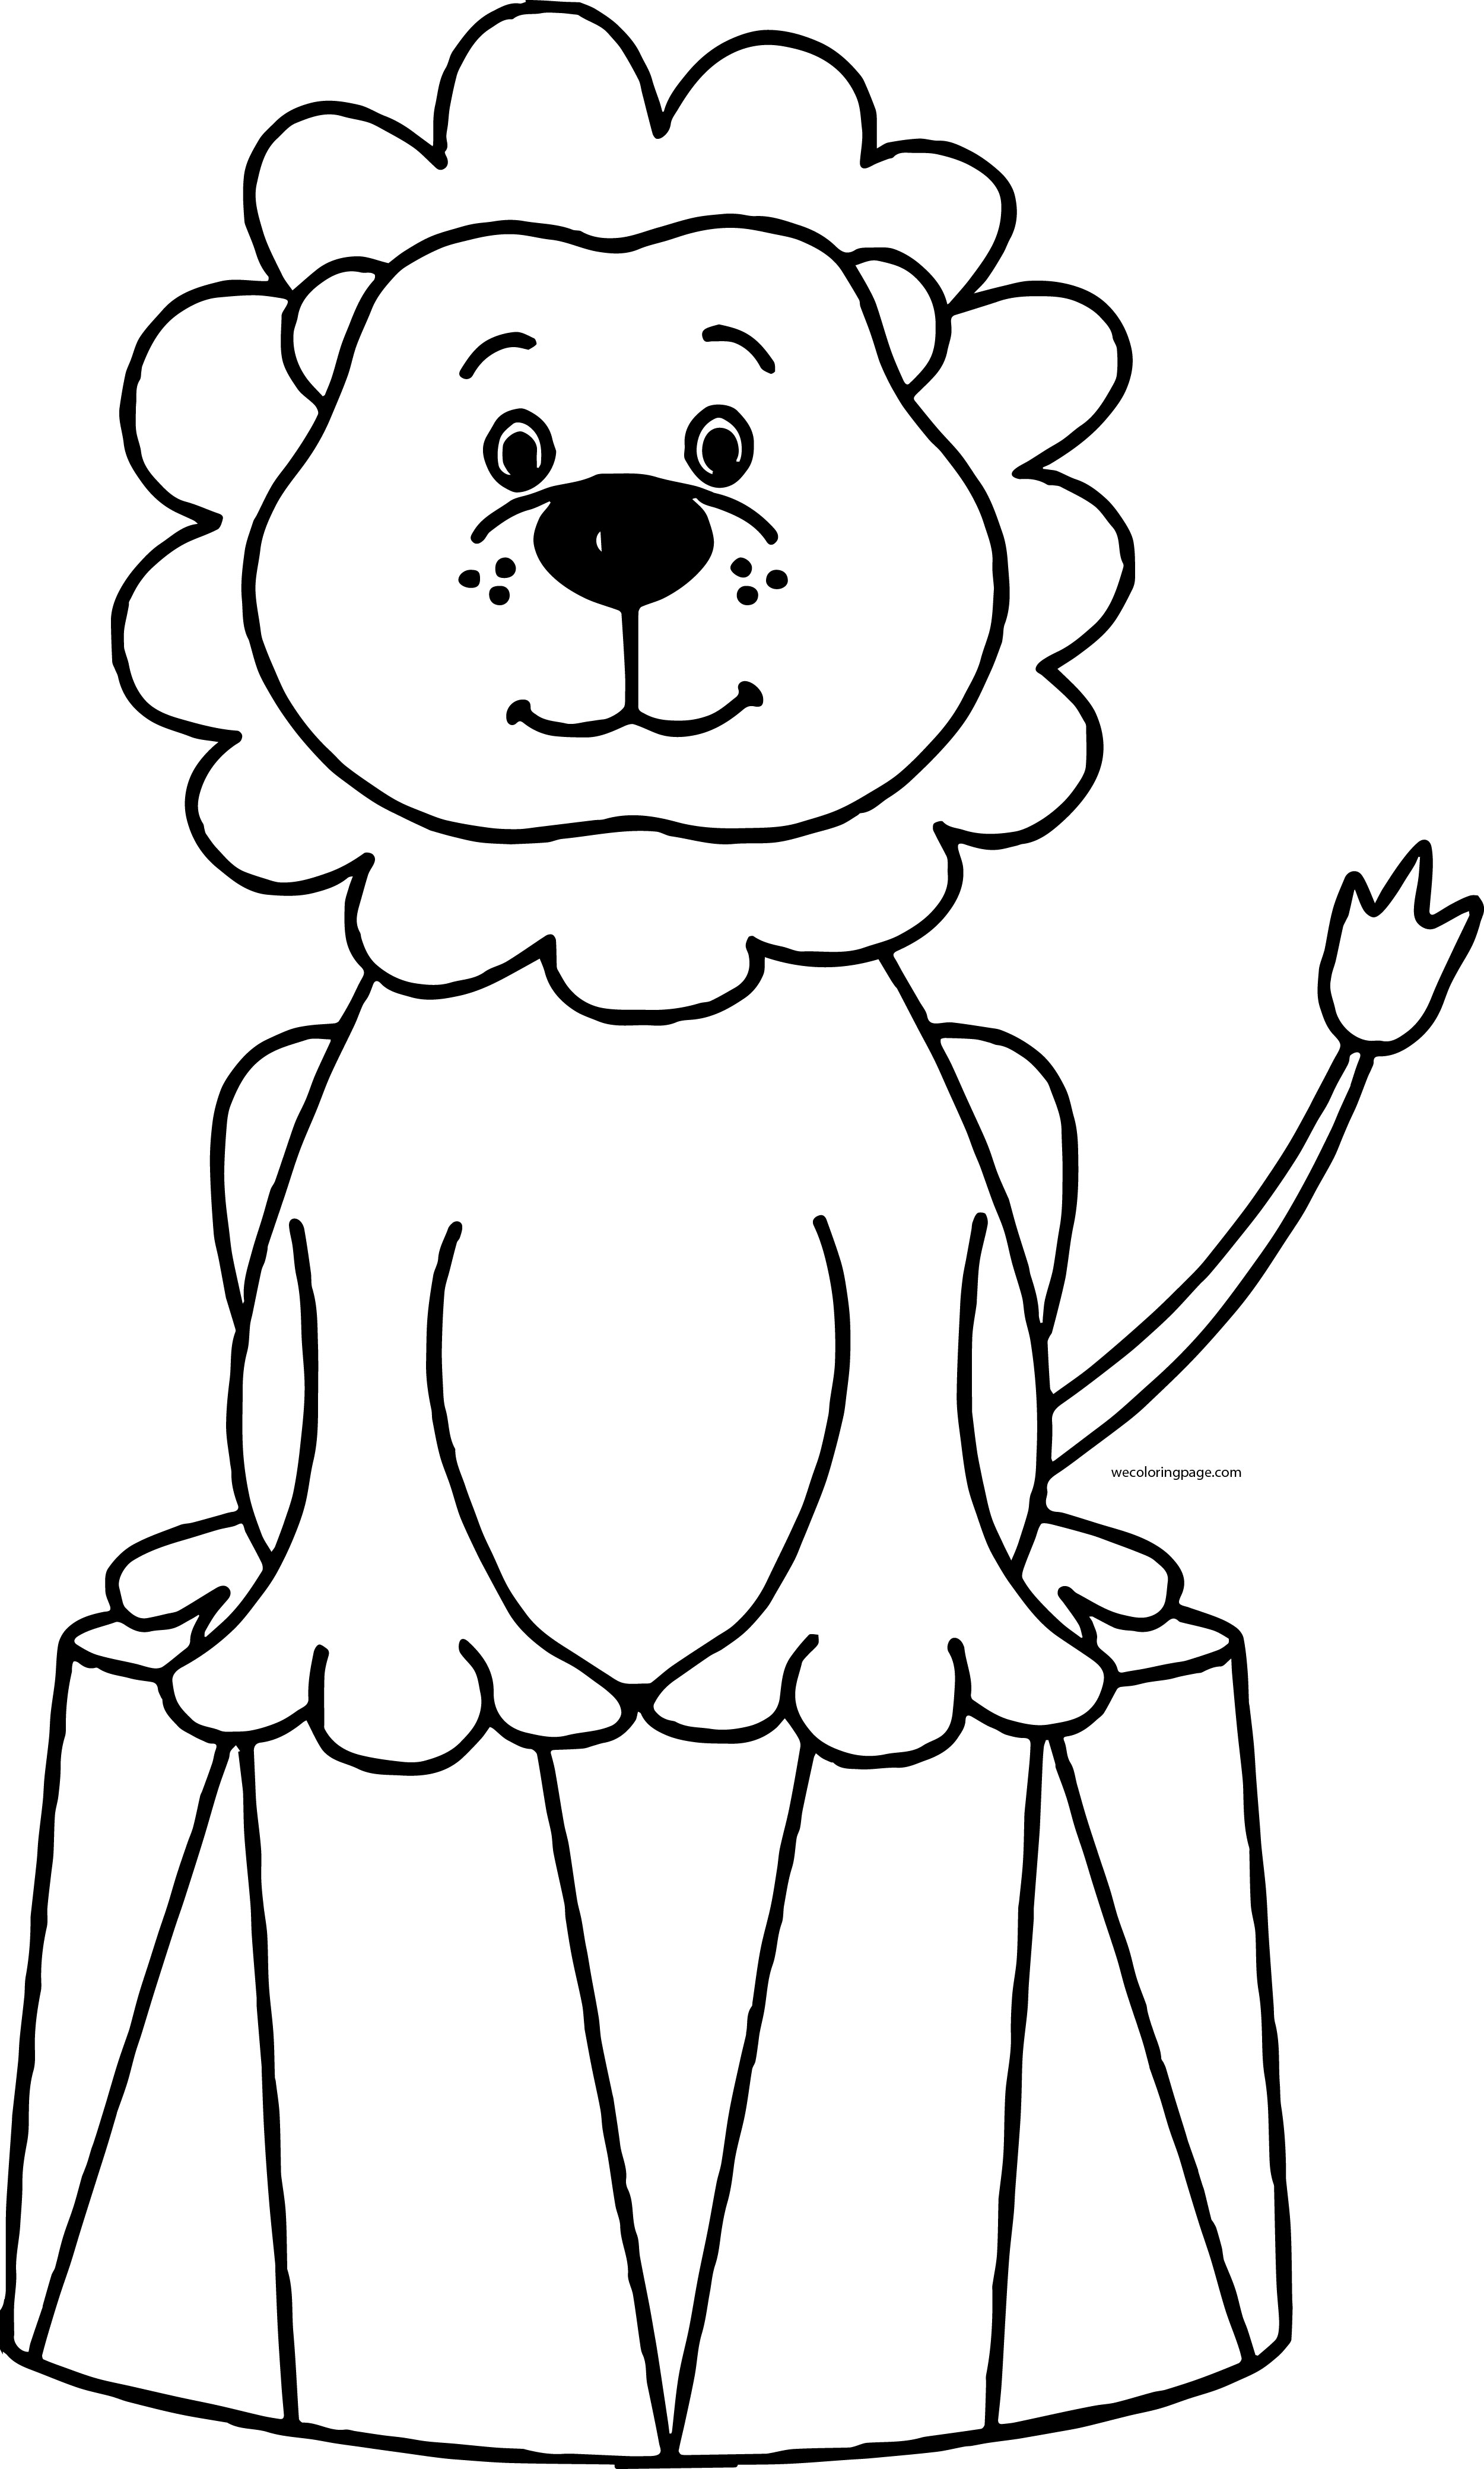 clipart black and white lion - photo #30